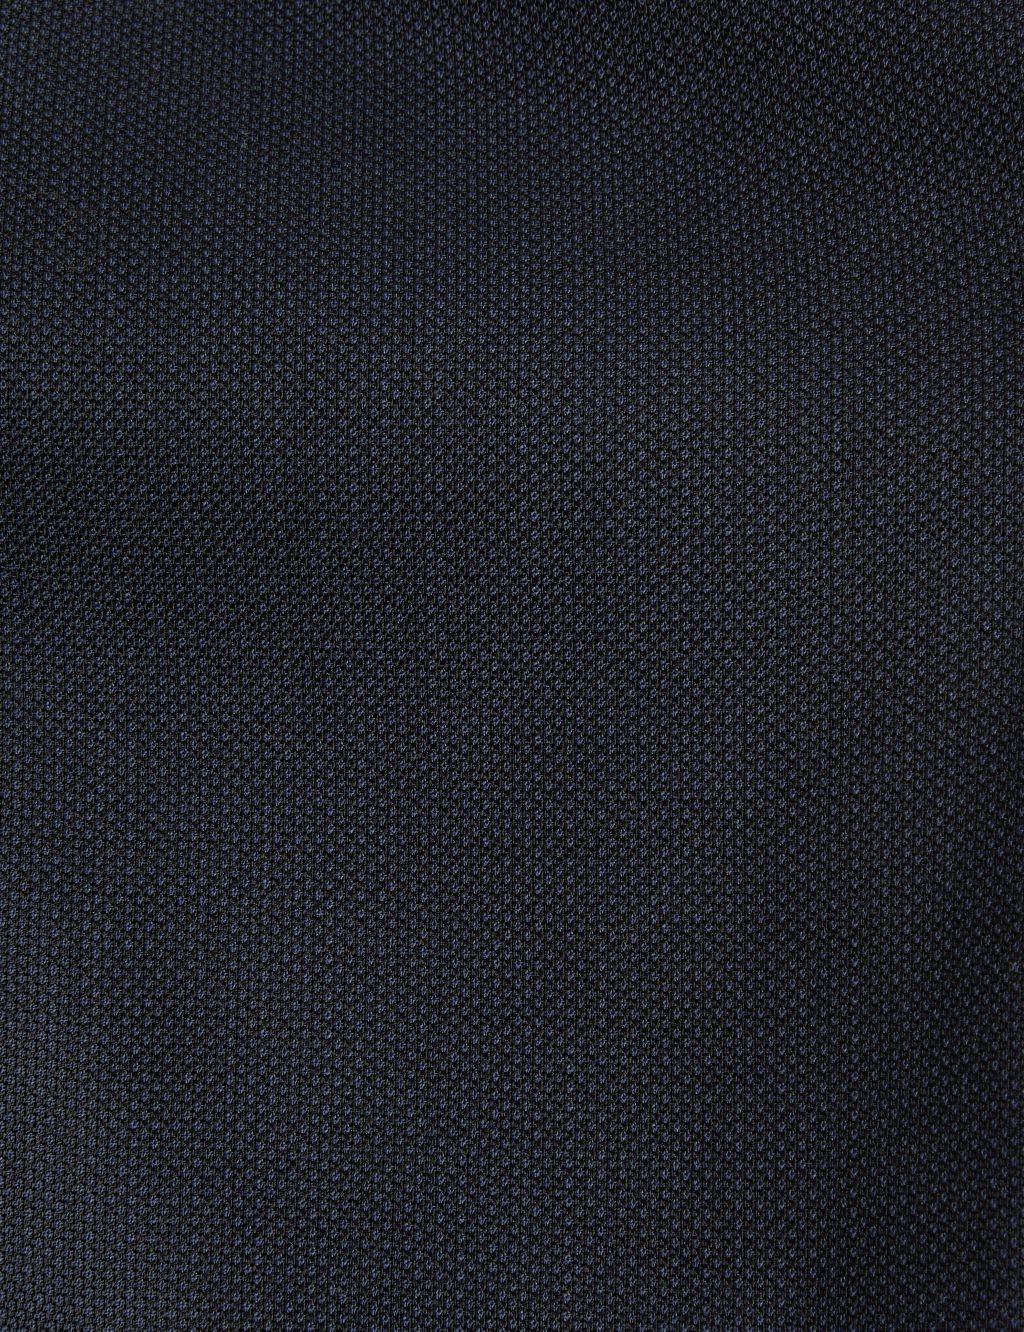 Tailored Fit Pure Wool Birdseye Trousers image 2